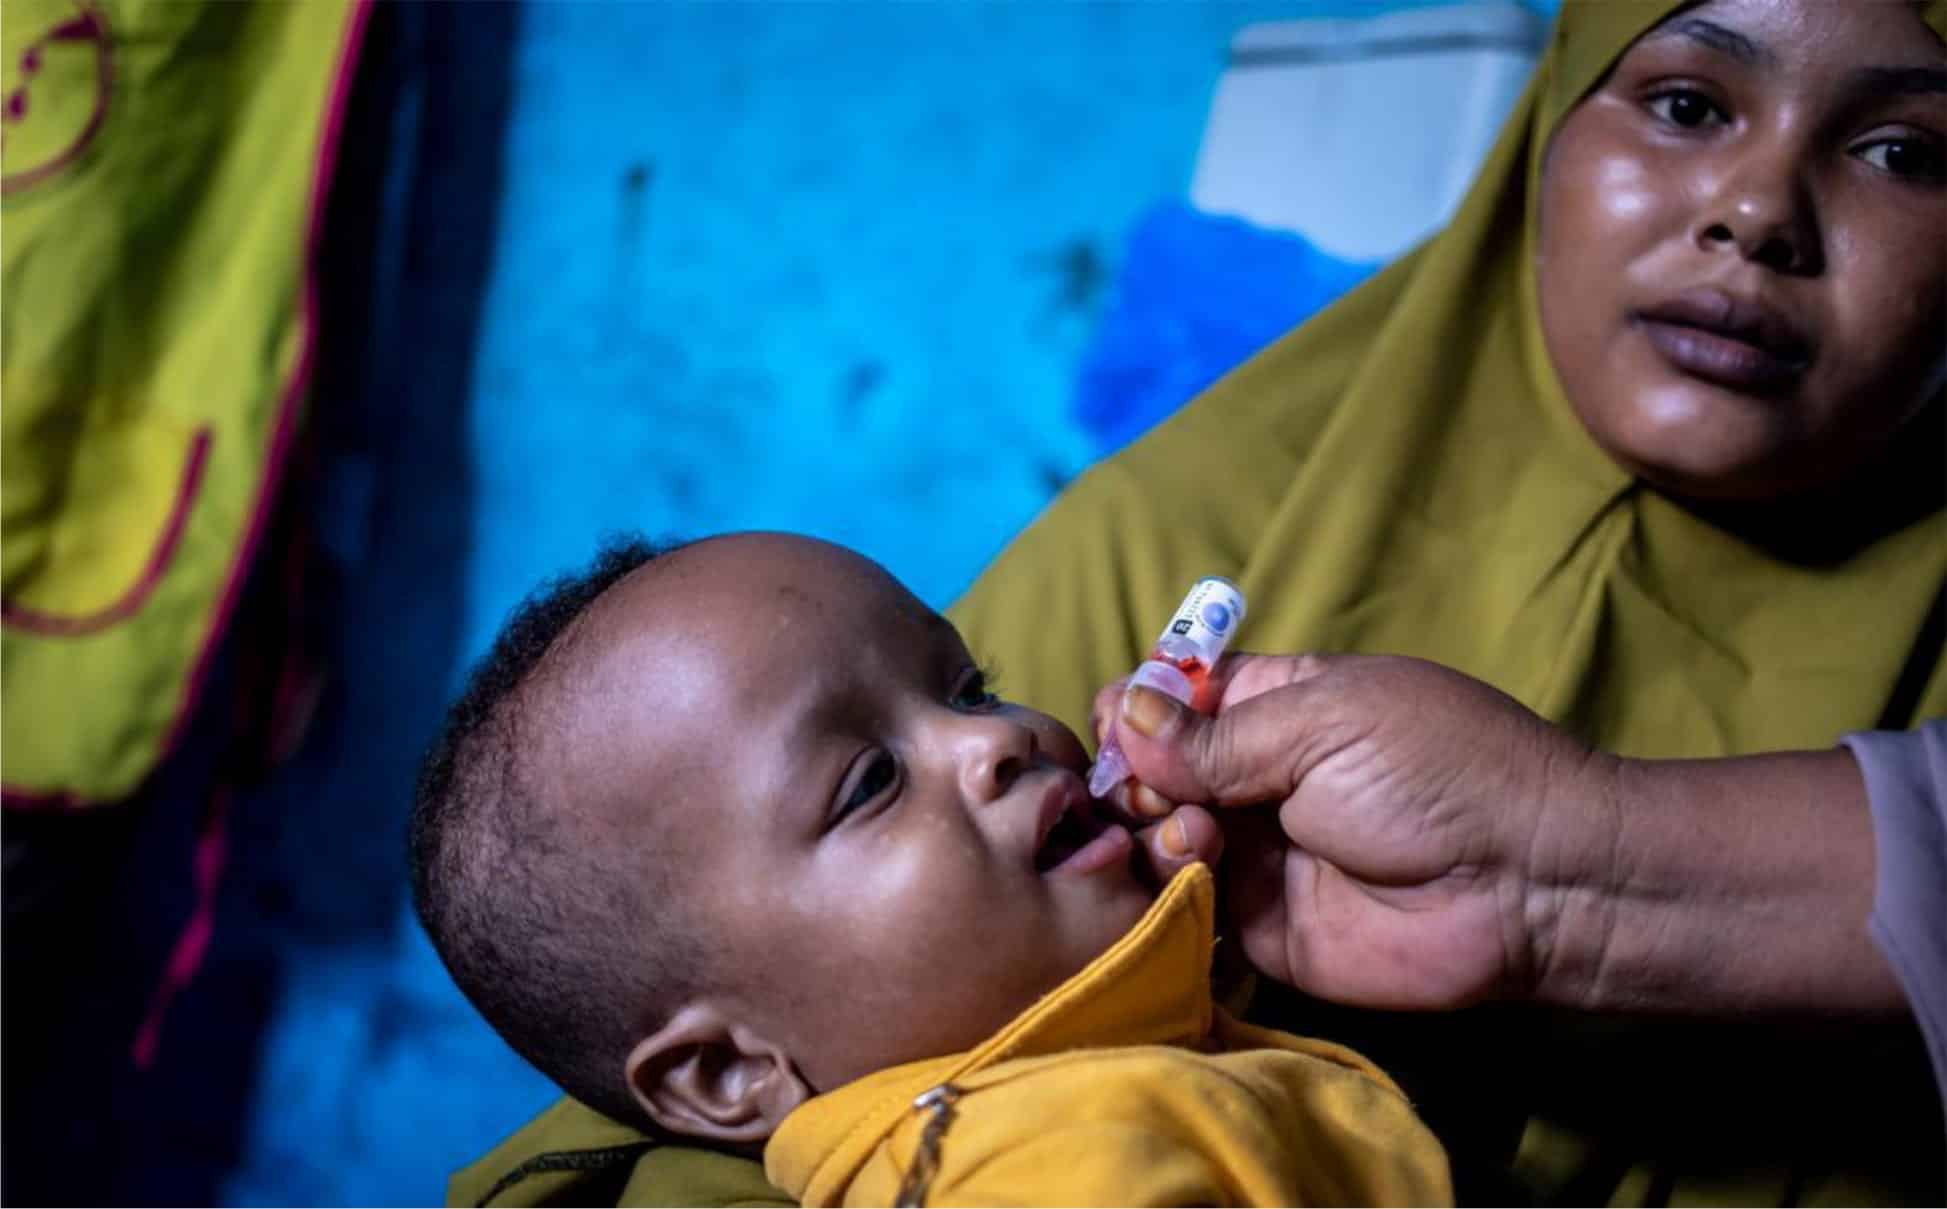 a child being vaccinated in Somalia where immunization campaigns